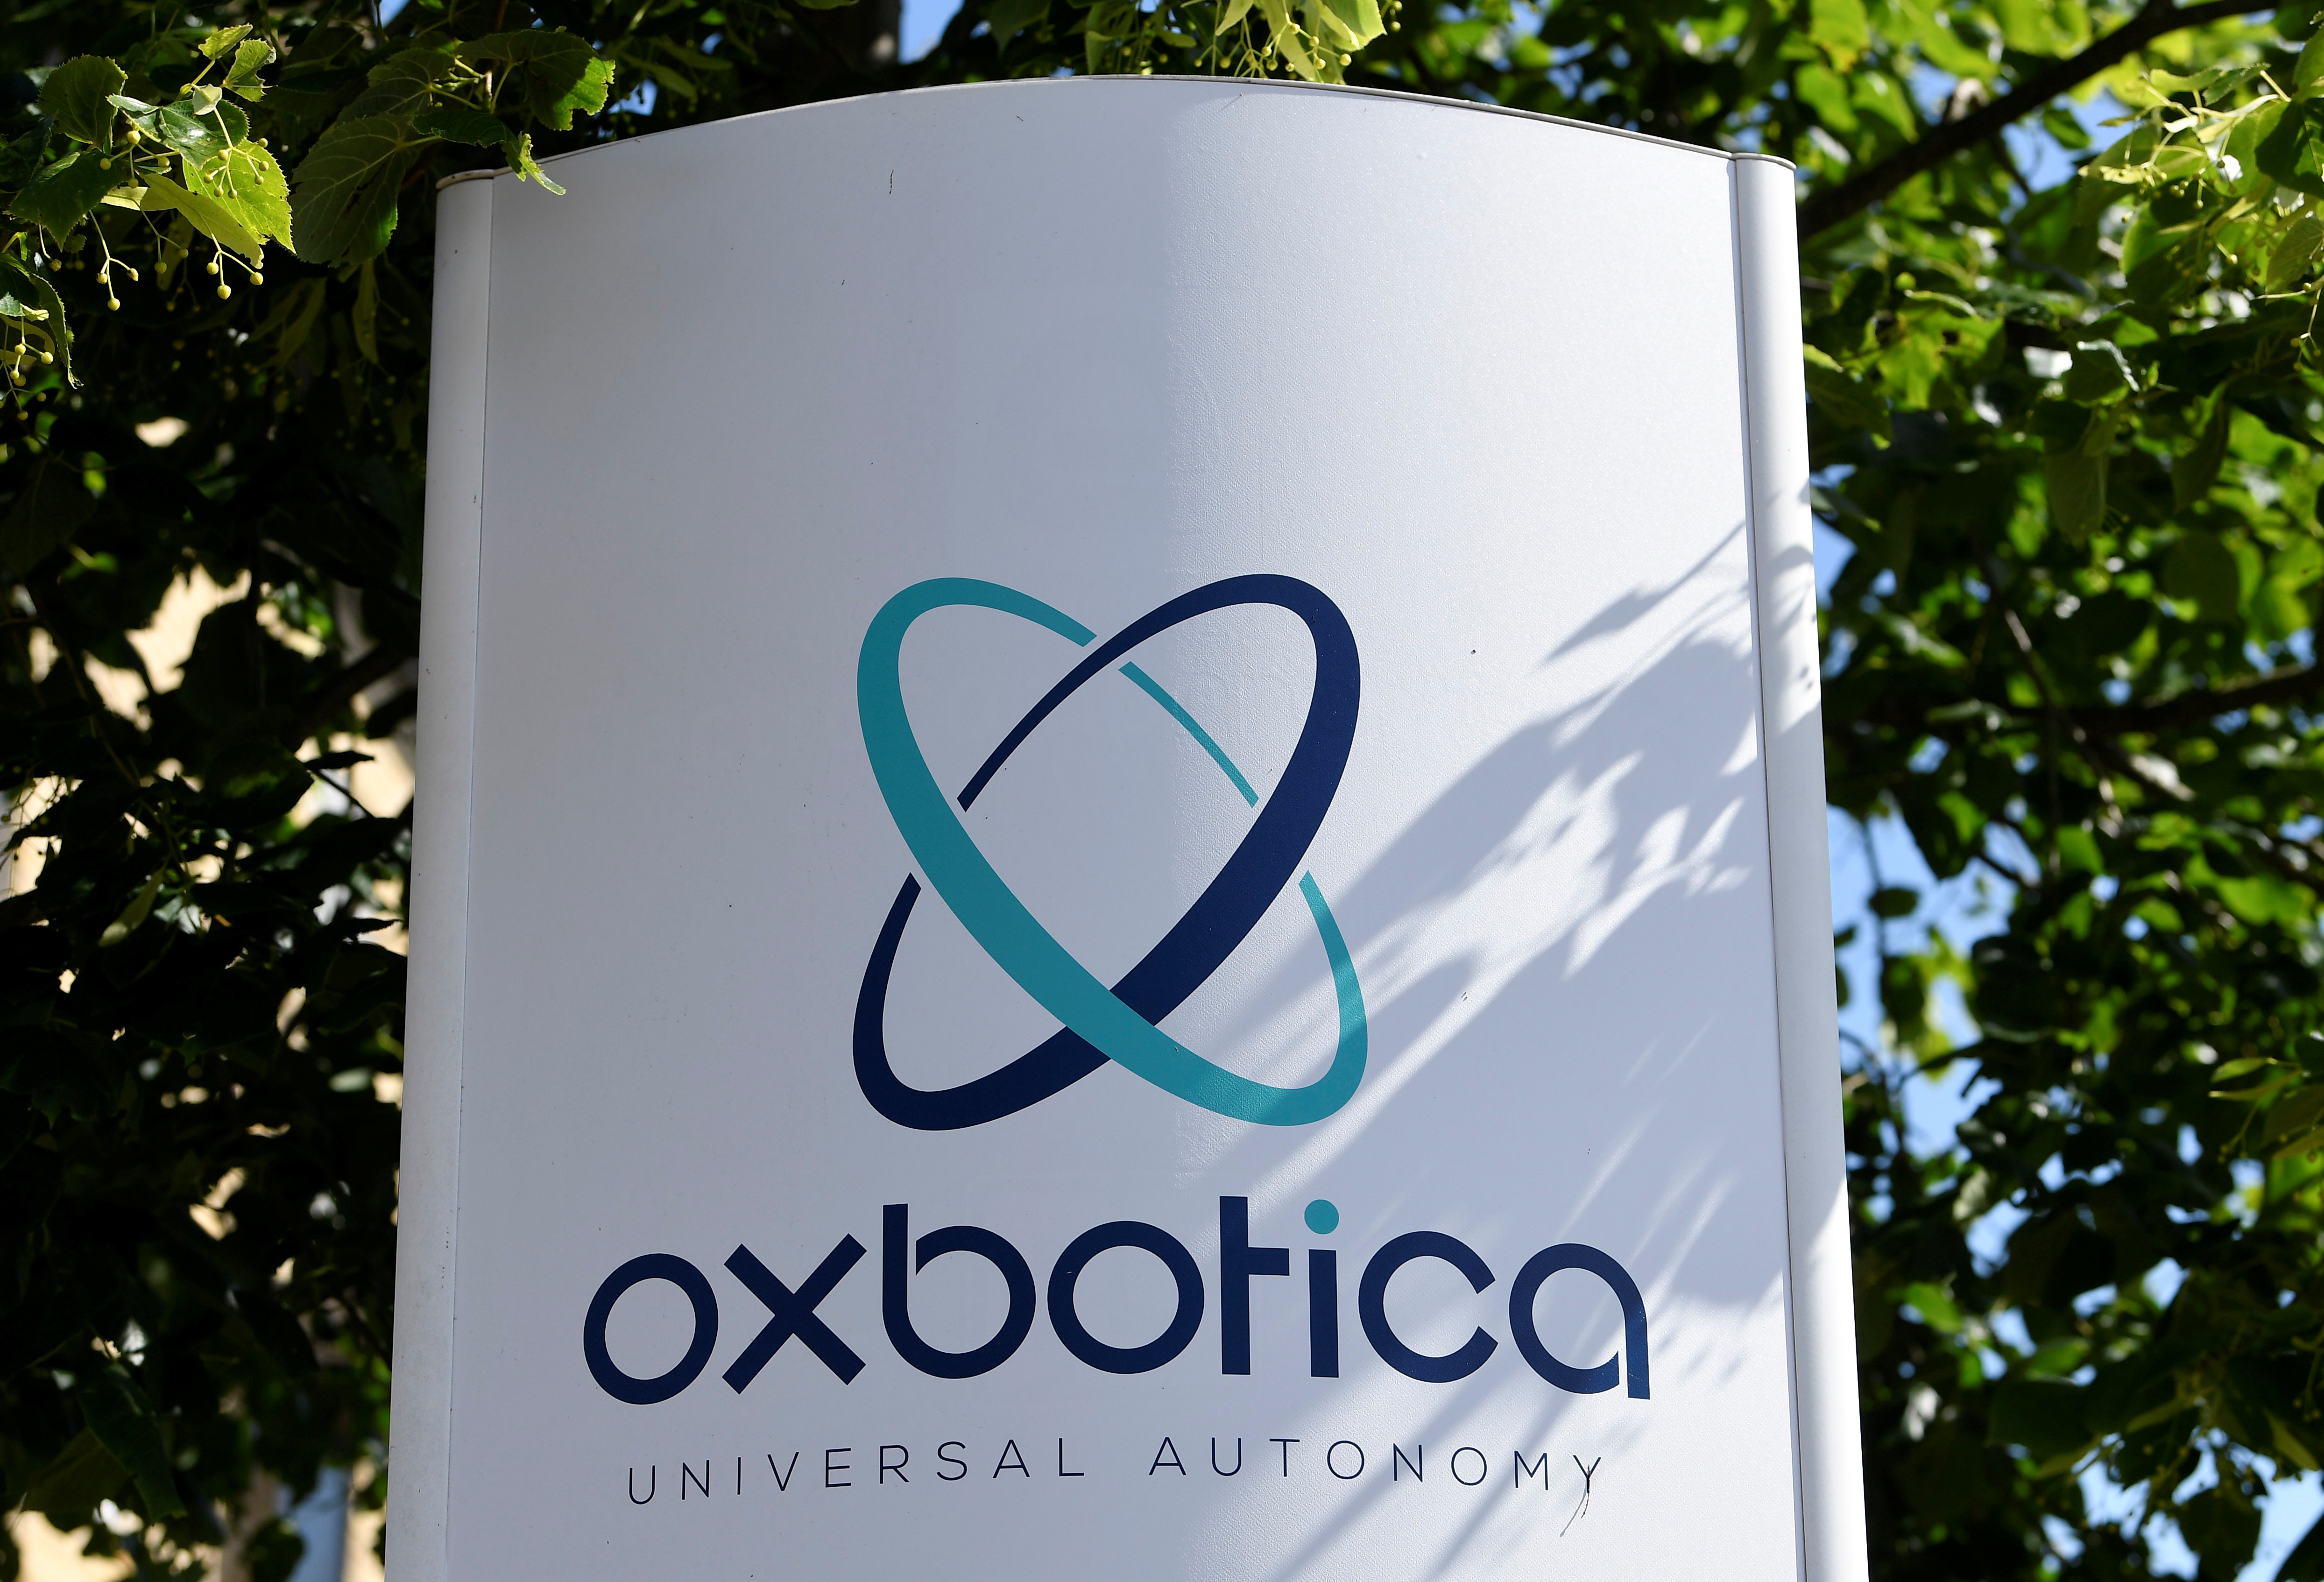 Signage is seen for Oxbotica, an autonomous vehicle technology tech firm, at their company headquarters in Oxford